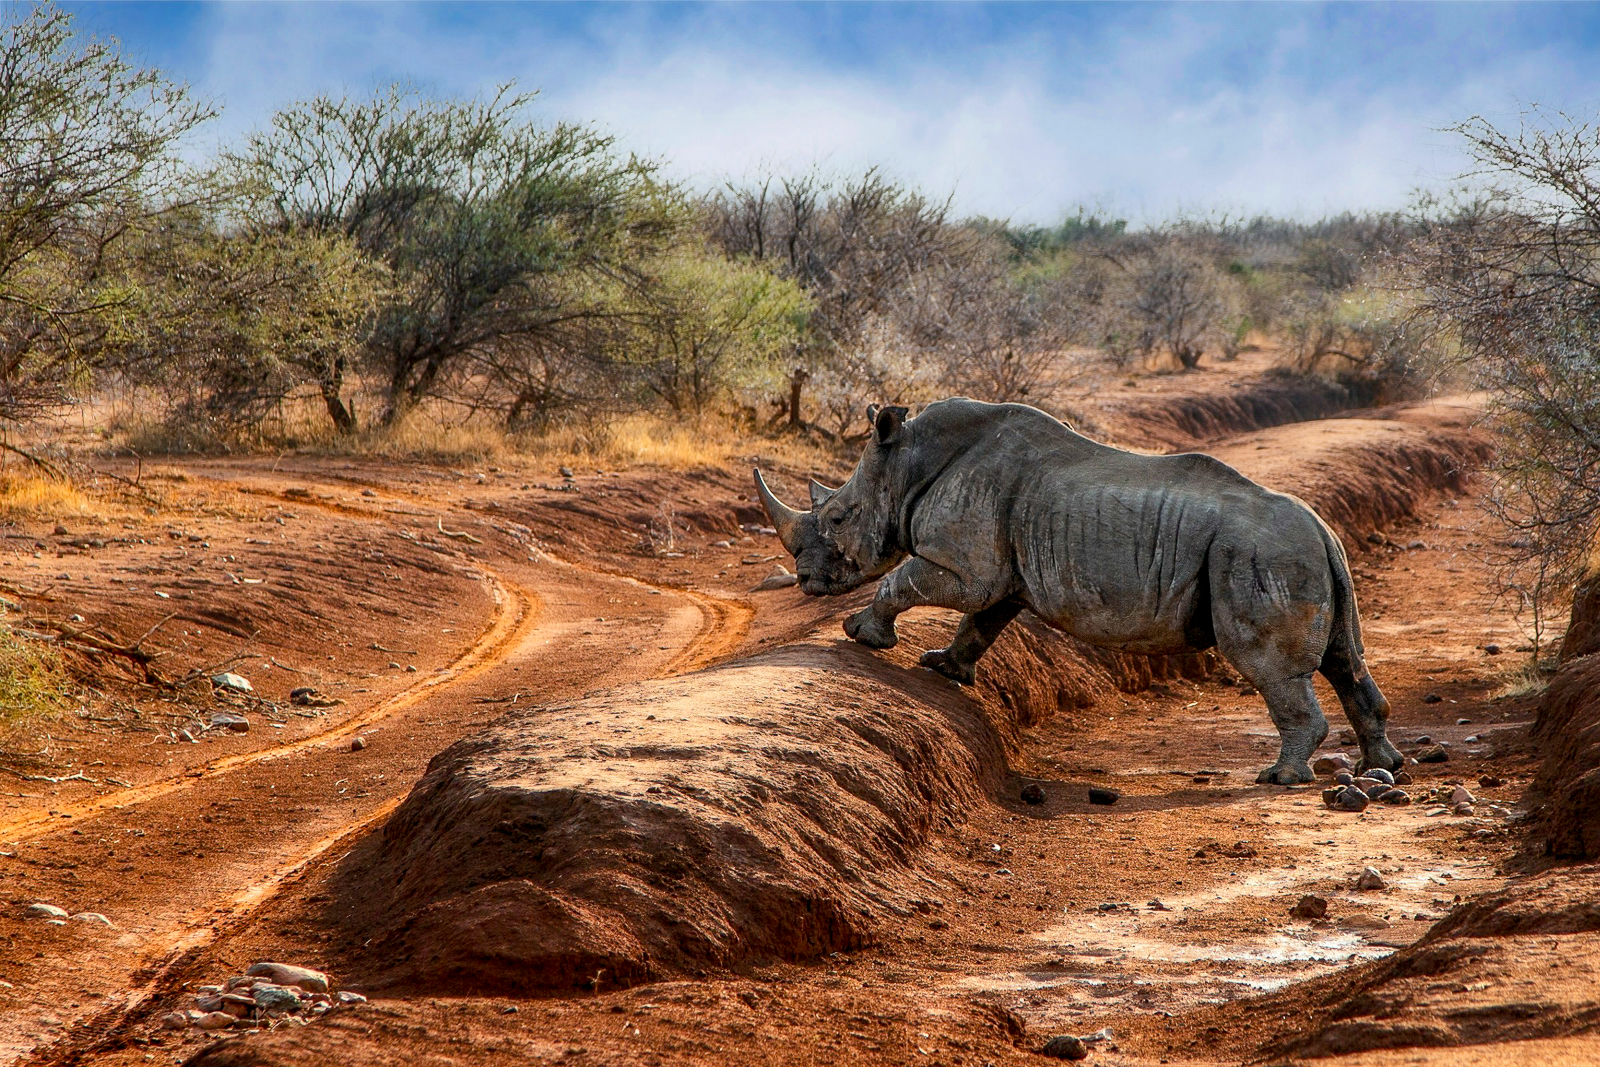 A rhino in Madikwe Game Reserve in South Africa